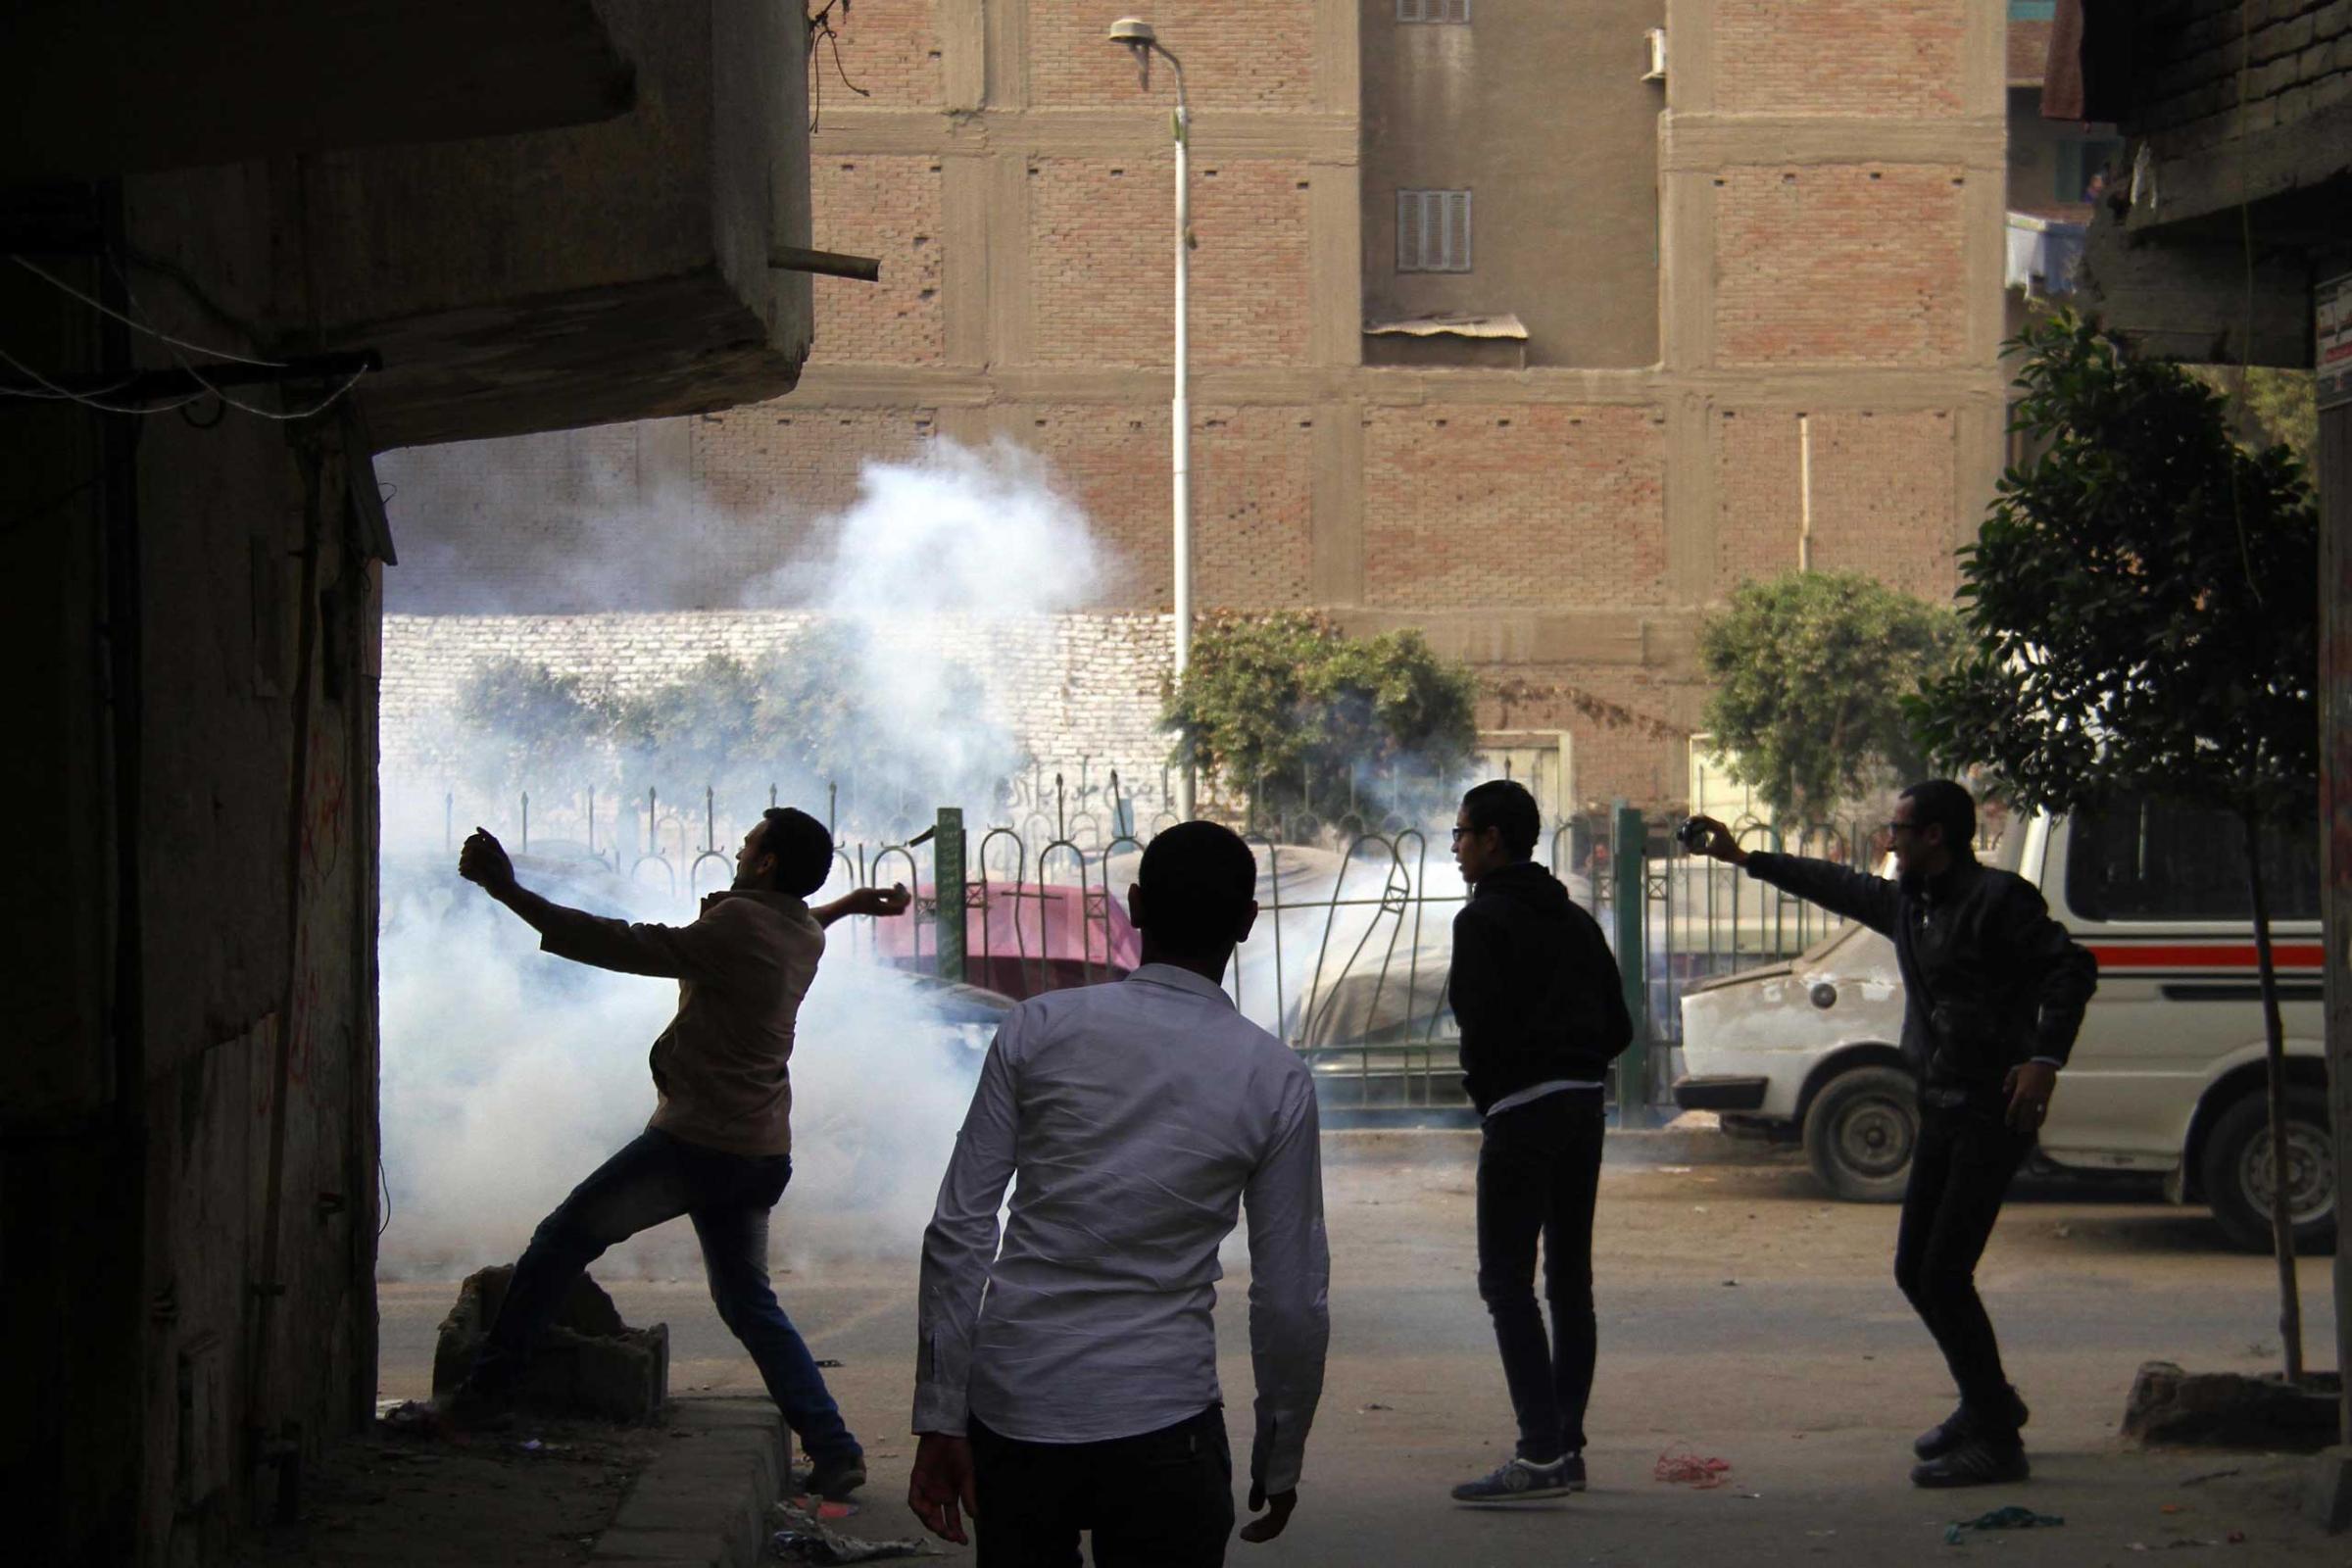 Supporters of Egypt's ousted President Mohamed Morsi are seen in clashes with the police during a demonstration in the district of Al Matarya, eastern Cairo on Jan. 25, 2015,